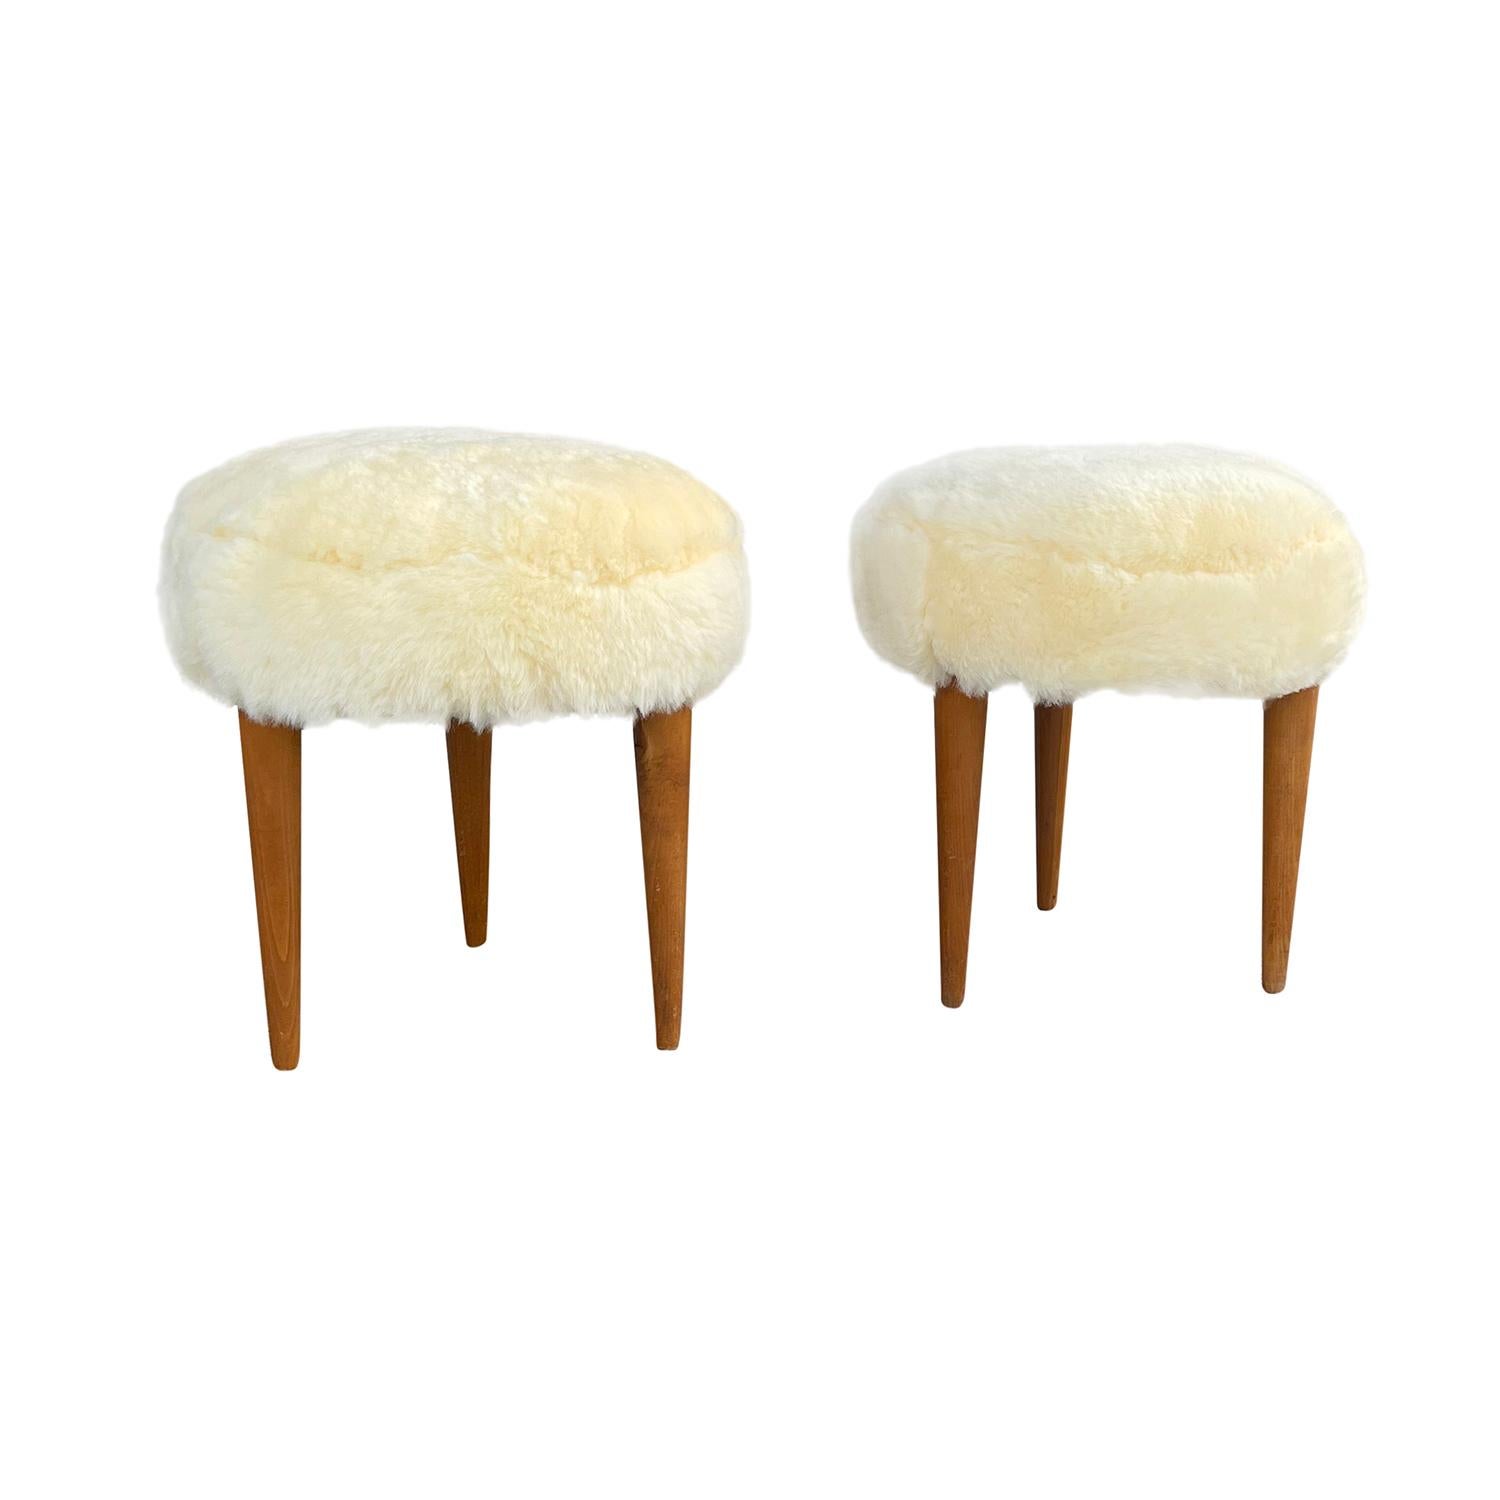 A vintage pair of Mid-Century Modern Italian round stools made of hand crafted walnut, standing on three straight wooden feet, in good condition. Newly upholstered in yellow sheepskin. Wear consistent with age and use, circa 1950-1960, Italy.